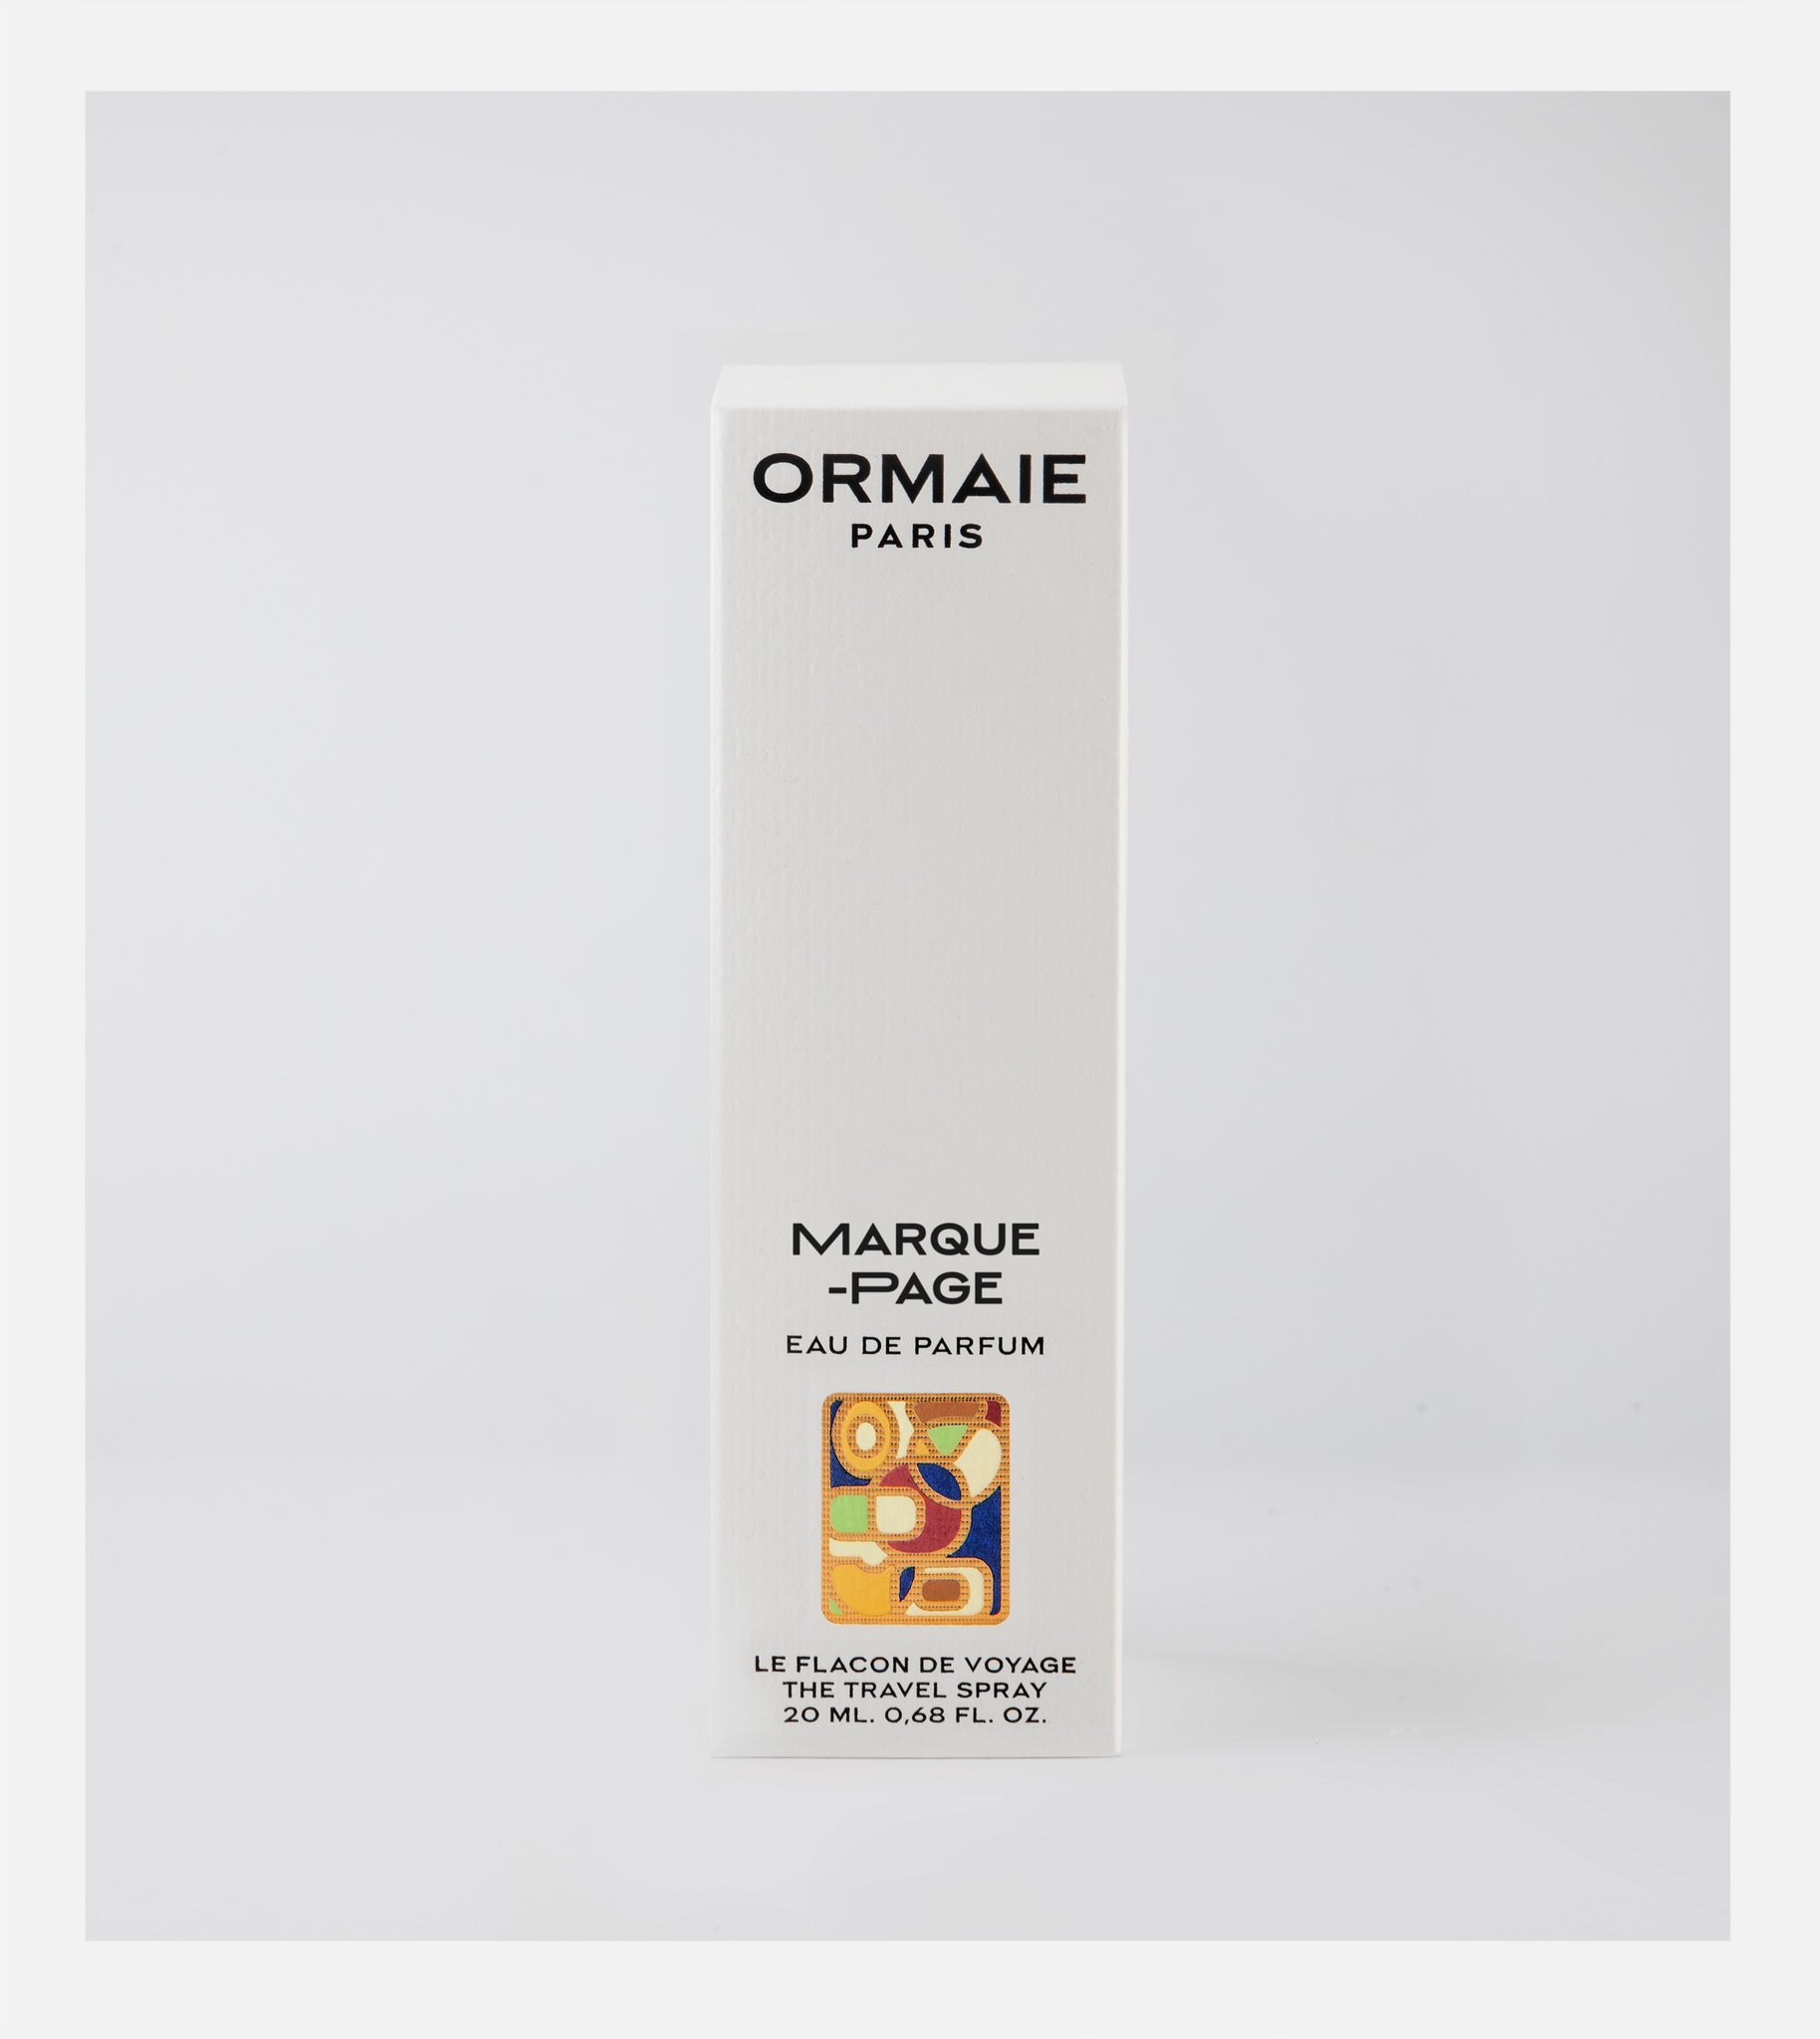 Marque-page – ORMAIE